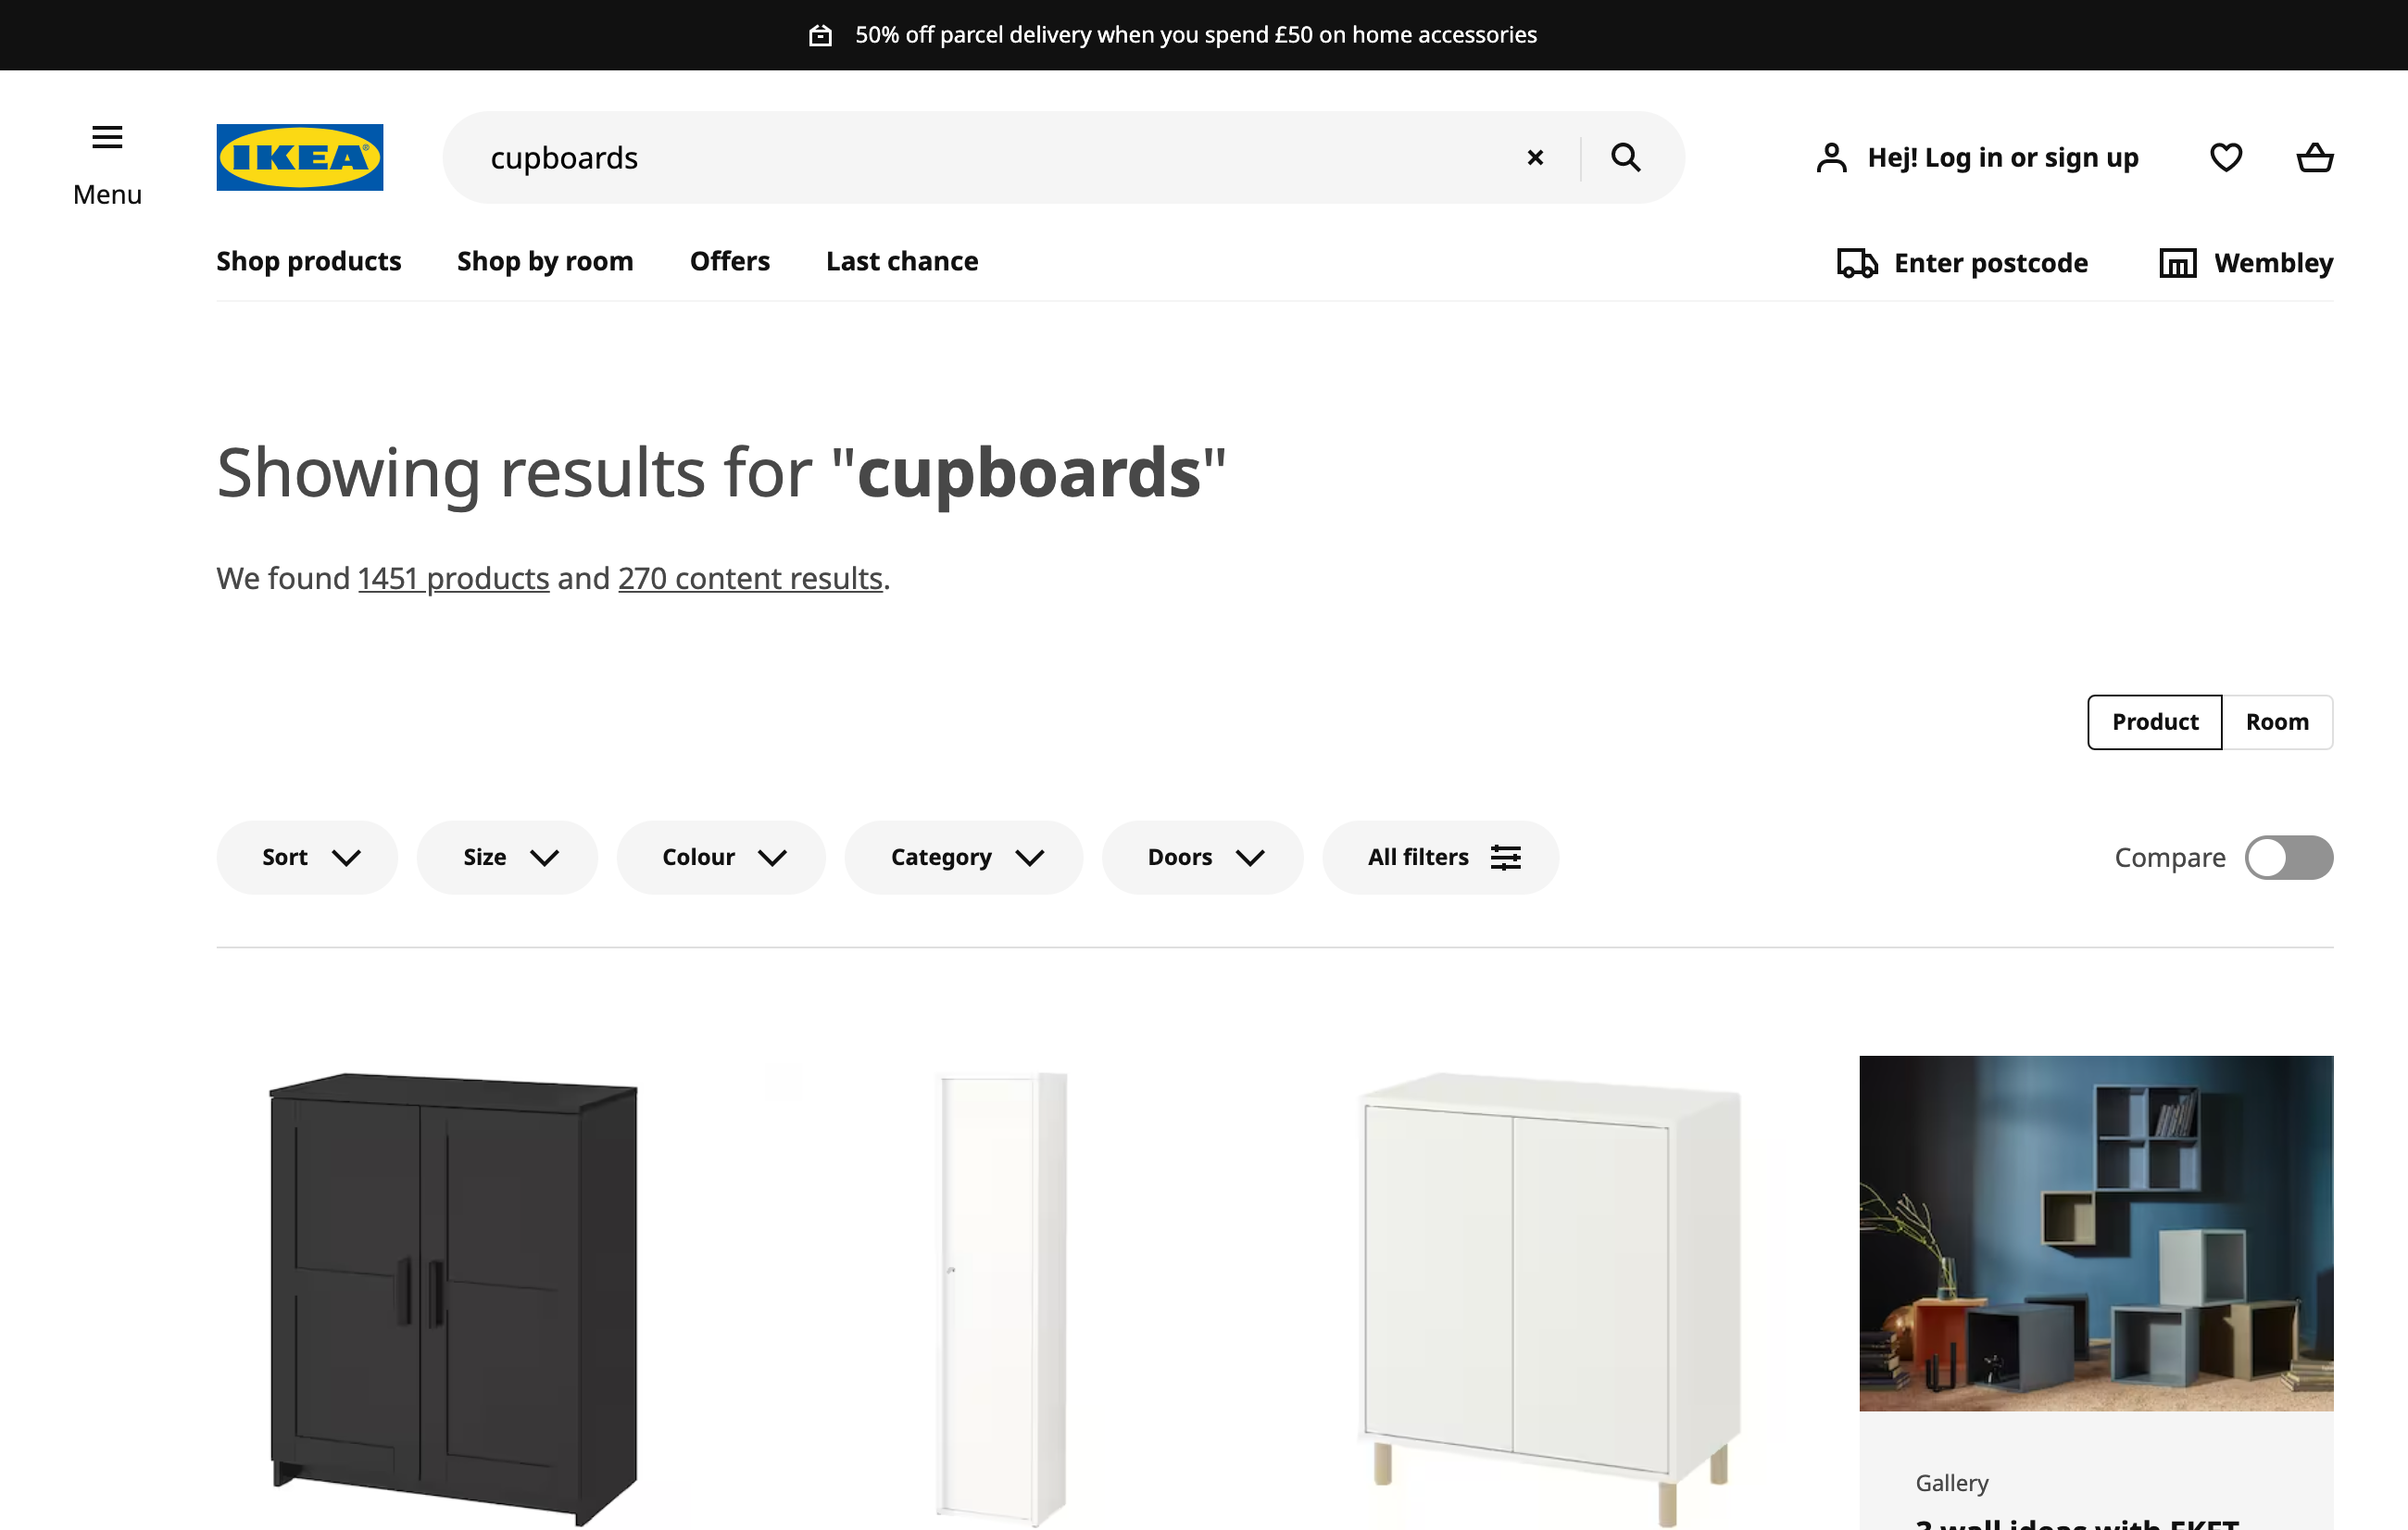 Internal search results on ikea.com for the UK and the search for cupboards. 1,451 product results are found.